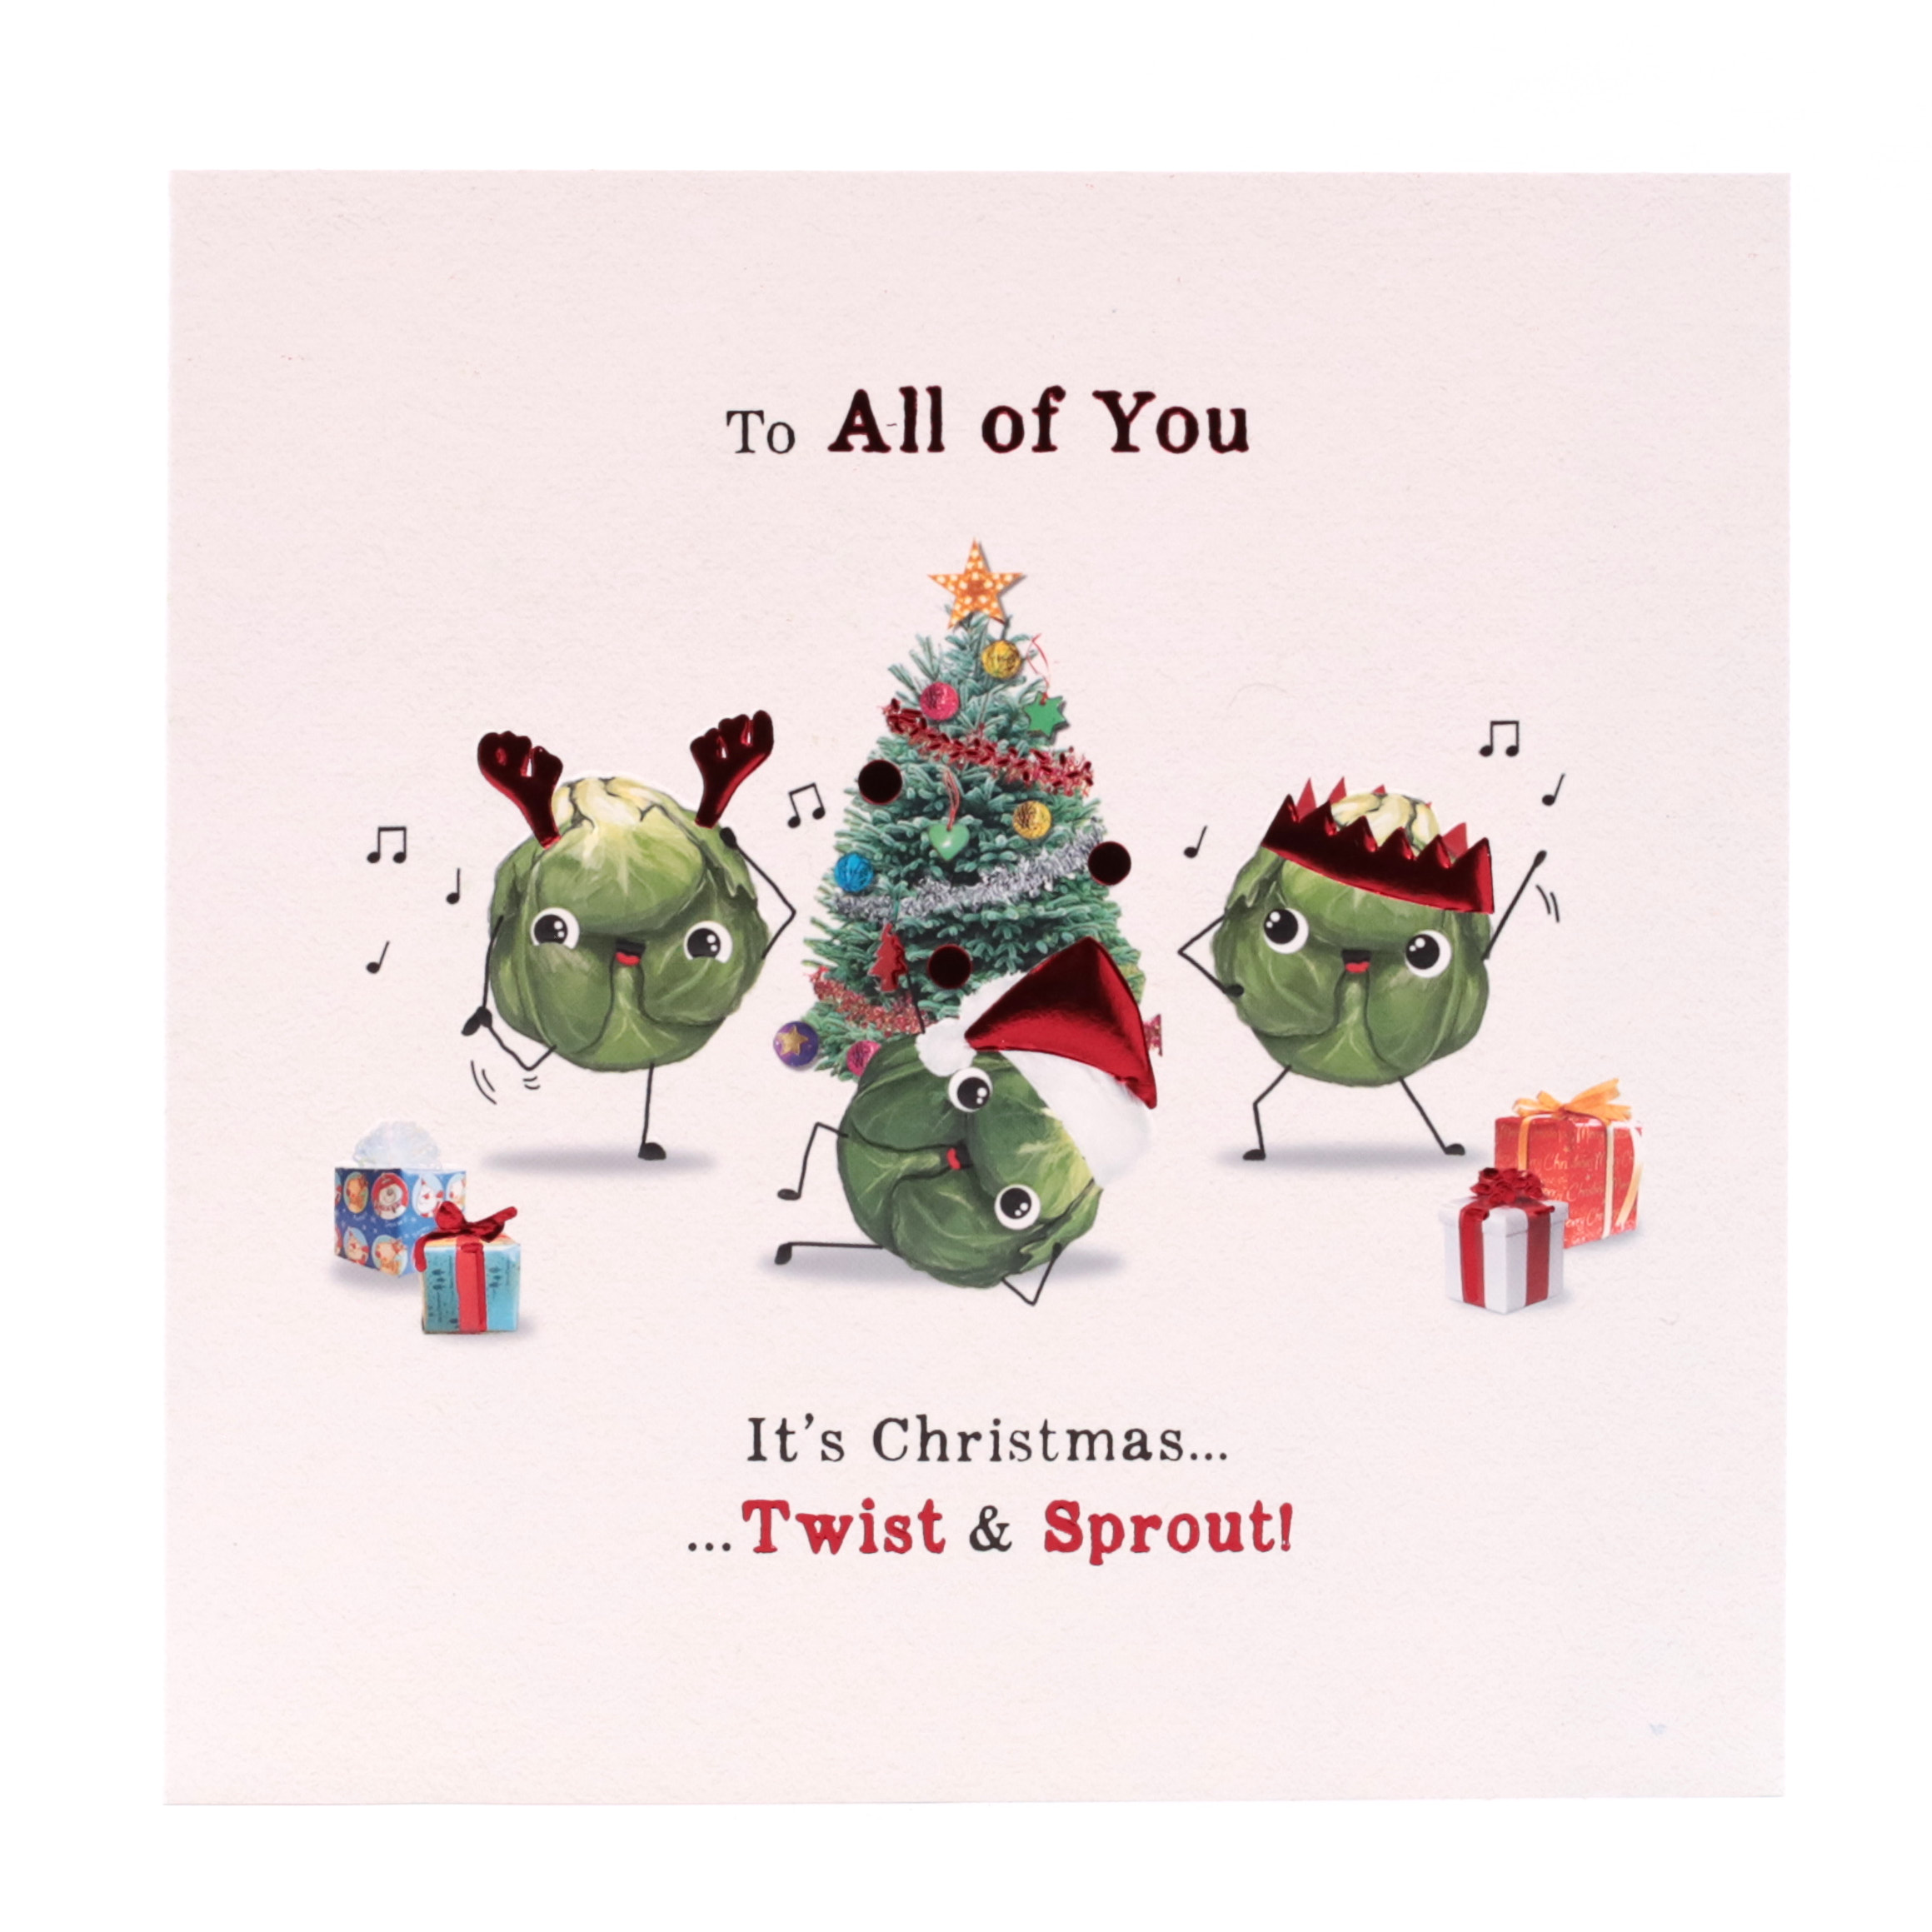 Christmas Card - All Of You, Twist And Sprout!